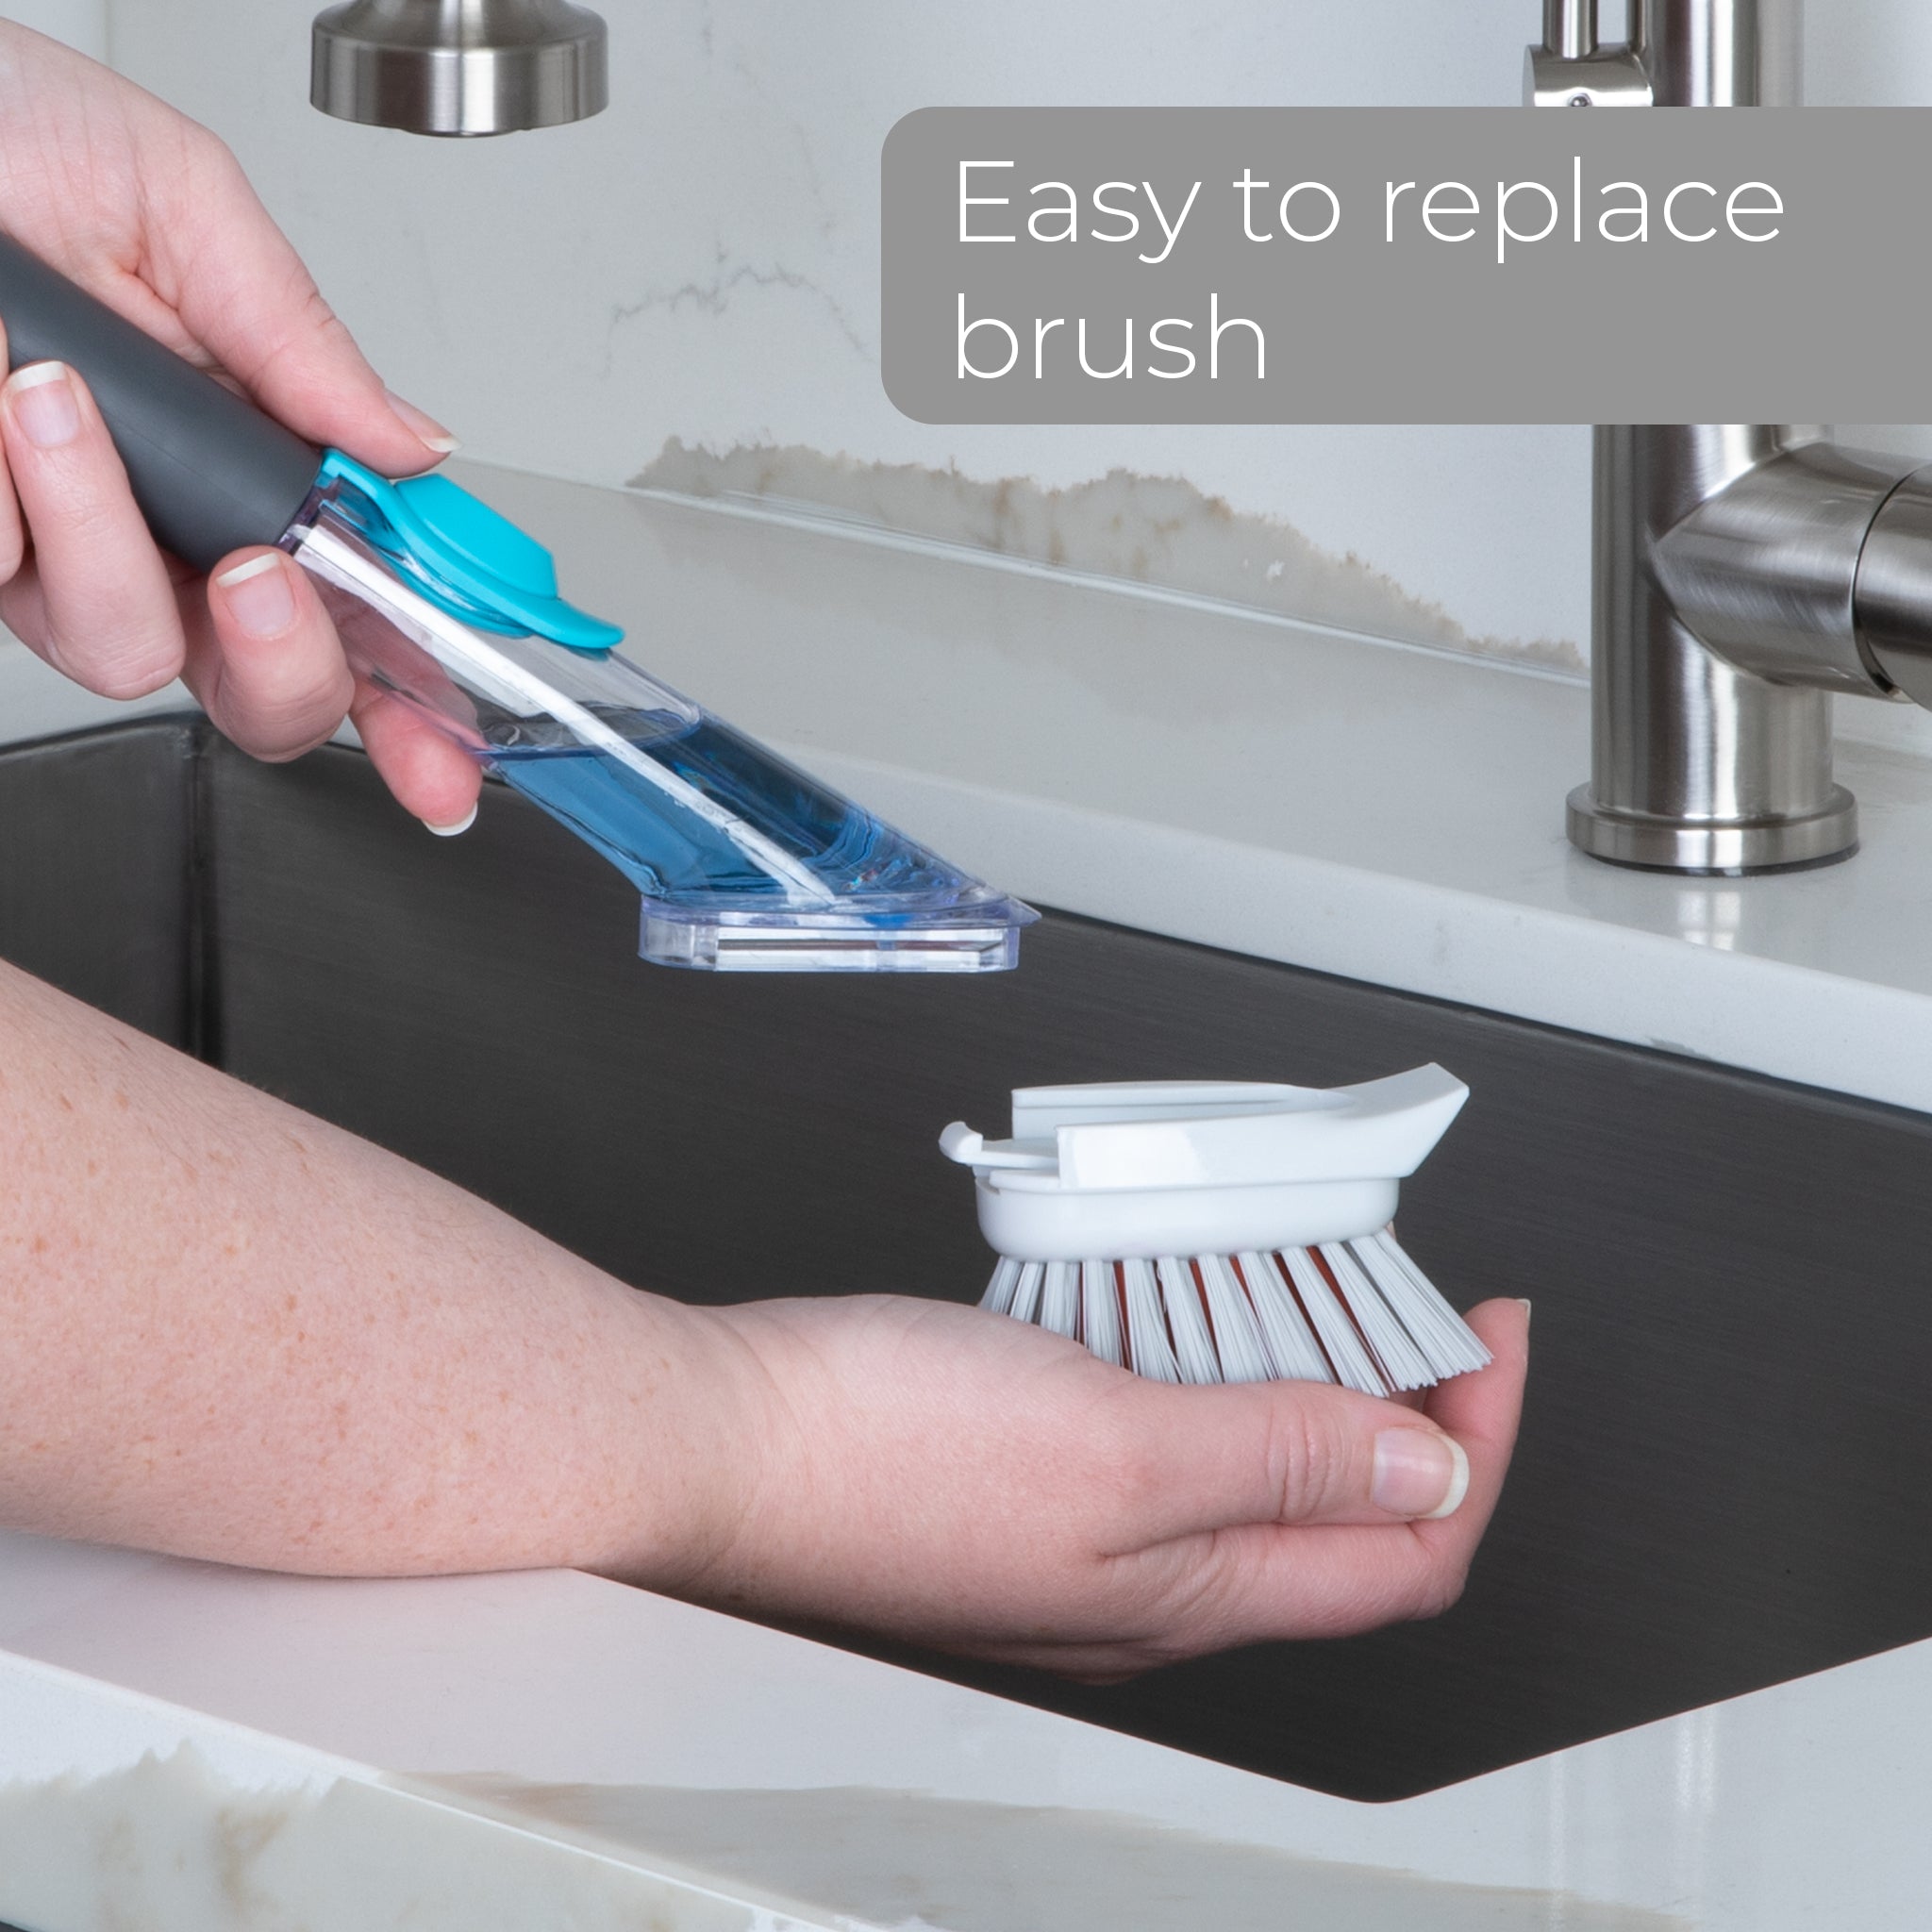 Replacement Brush Head with Built-In Scraper for Soap Dispensing Dish Wand - Smart Design® 2